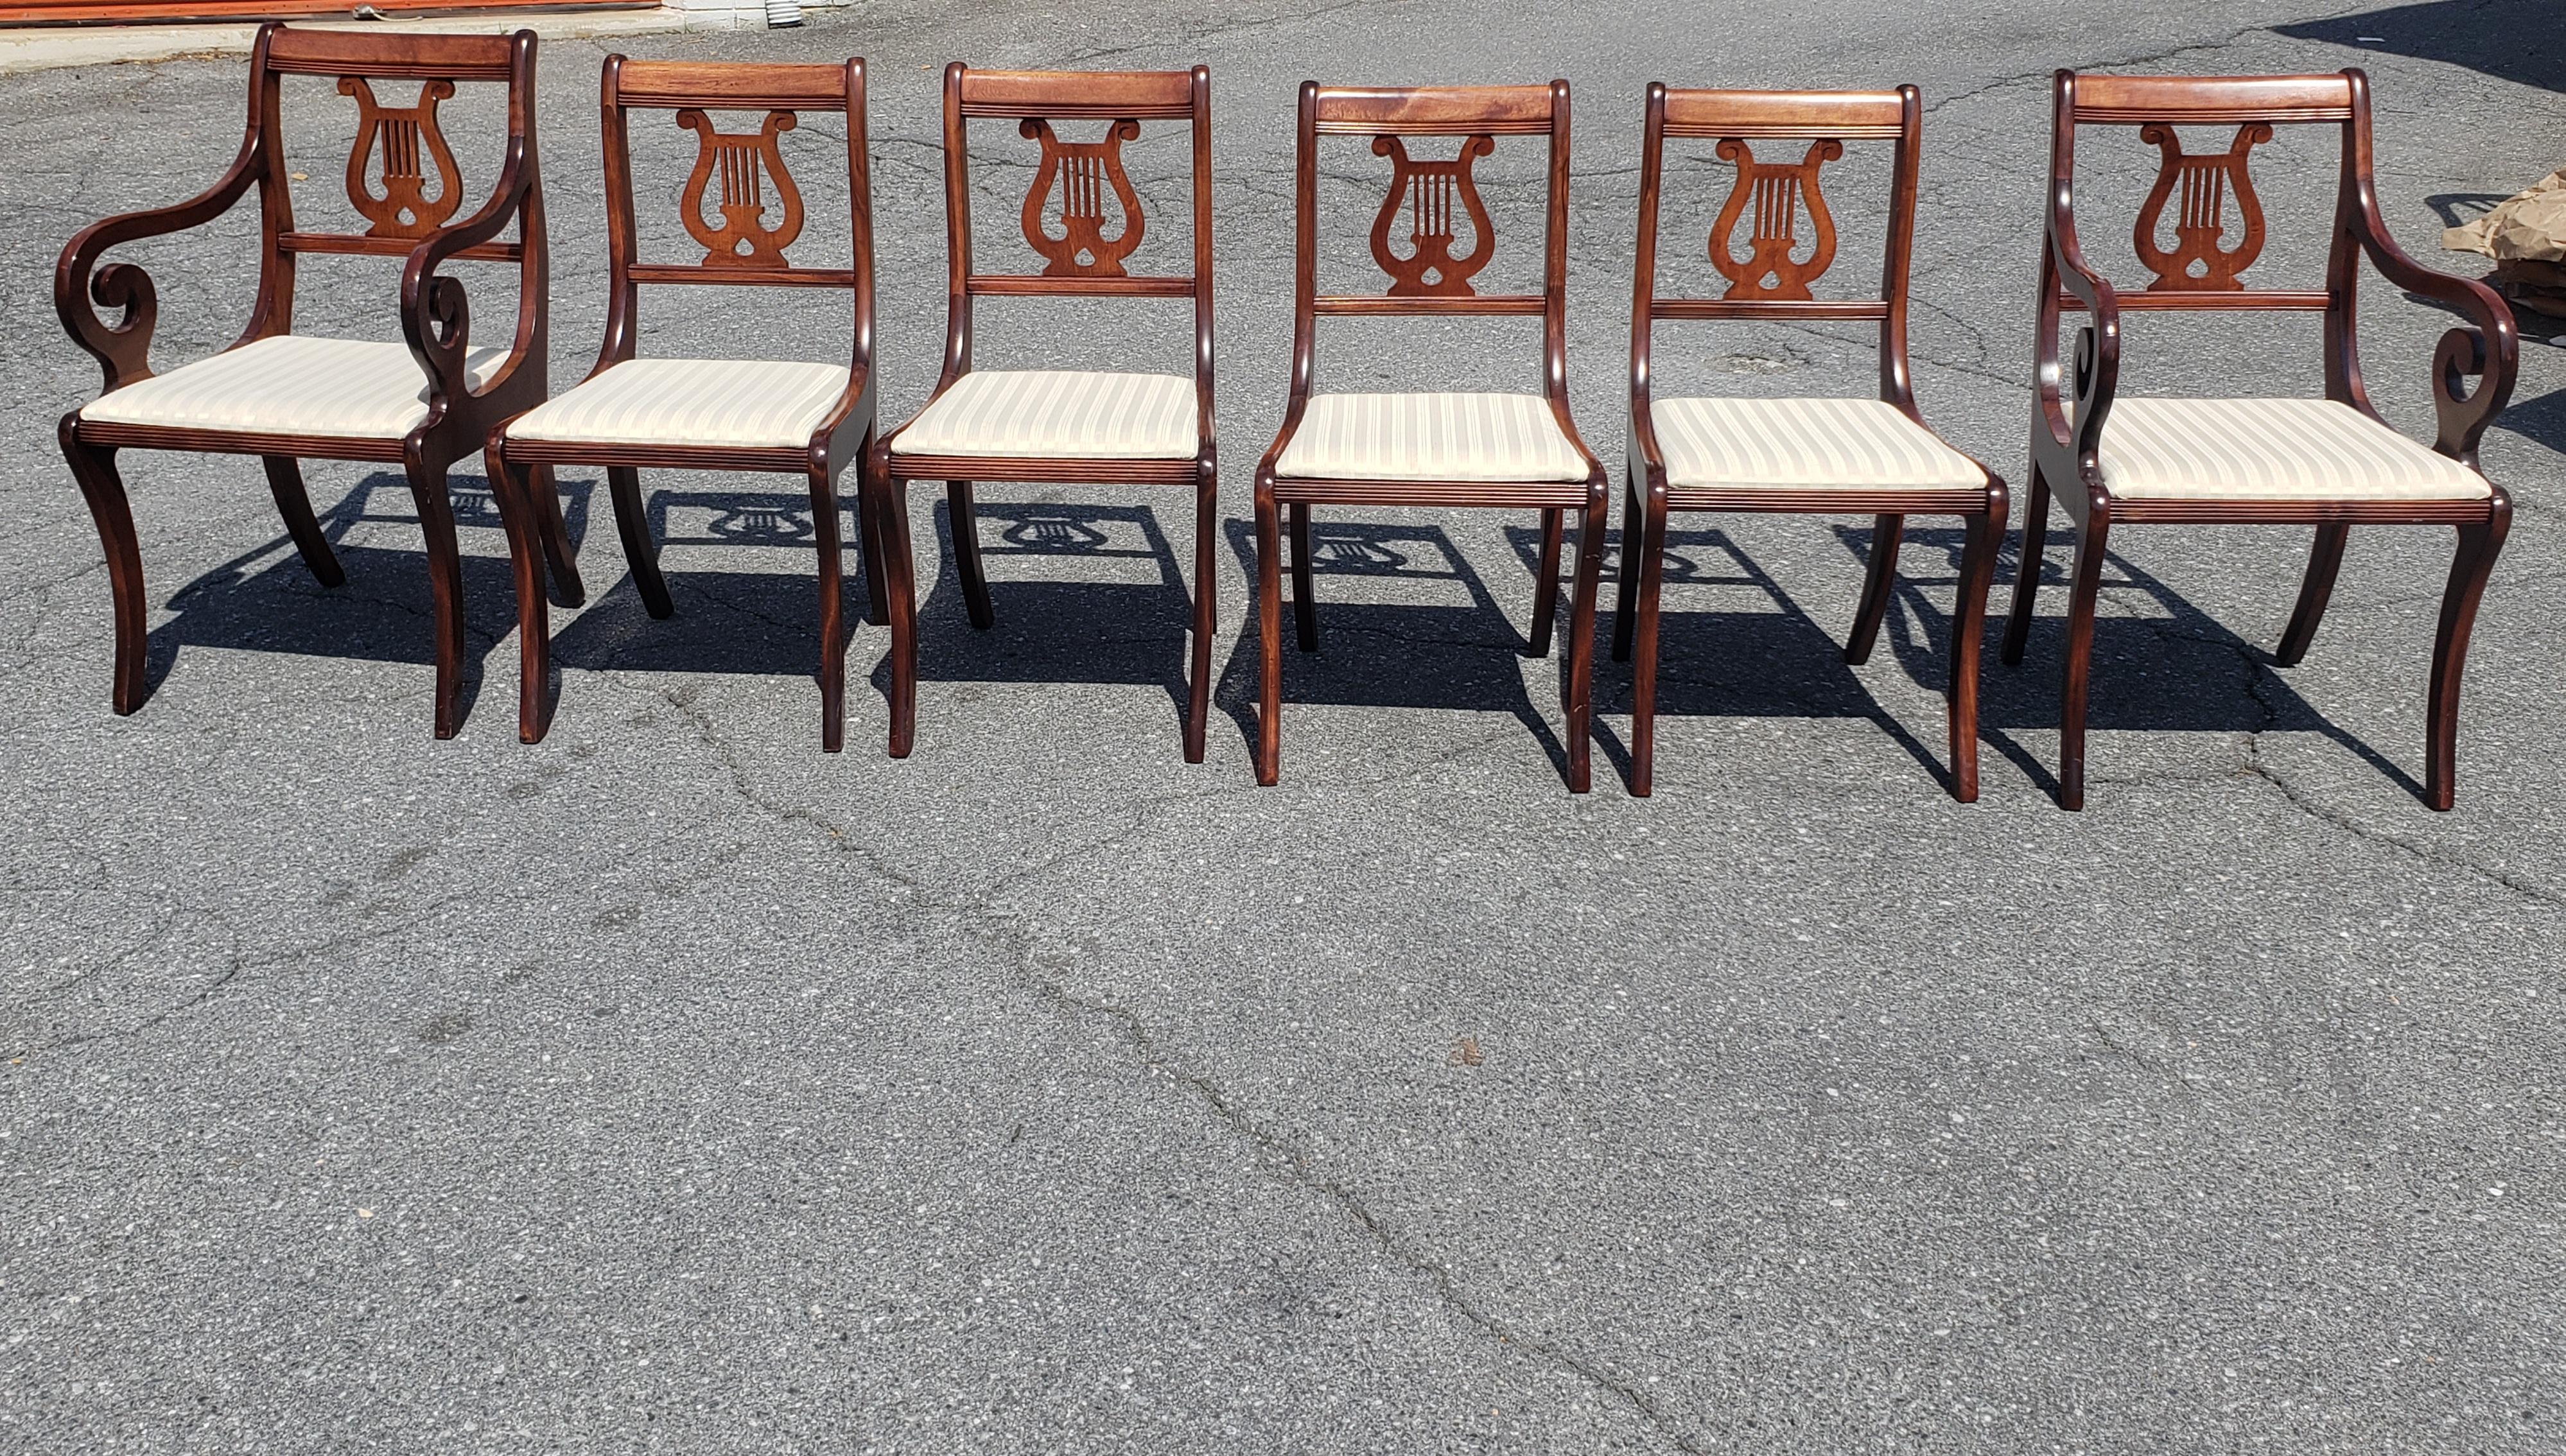 1940s Set of 6 Refinished Mahogany Klismos Lyre Back Chairs with 4 side chairs and two scroll arms captain chairs.
Sièges rembourrés de couleur crème.